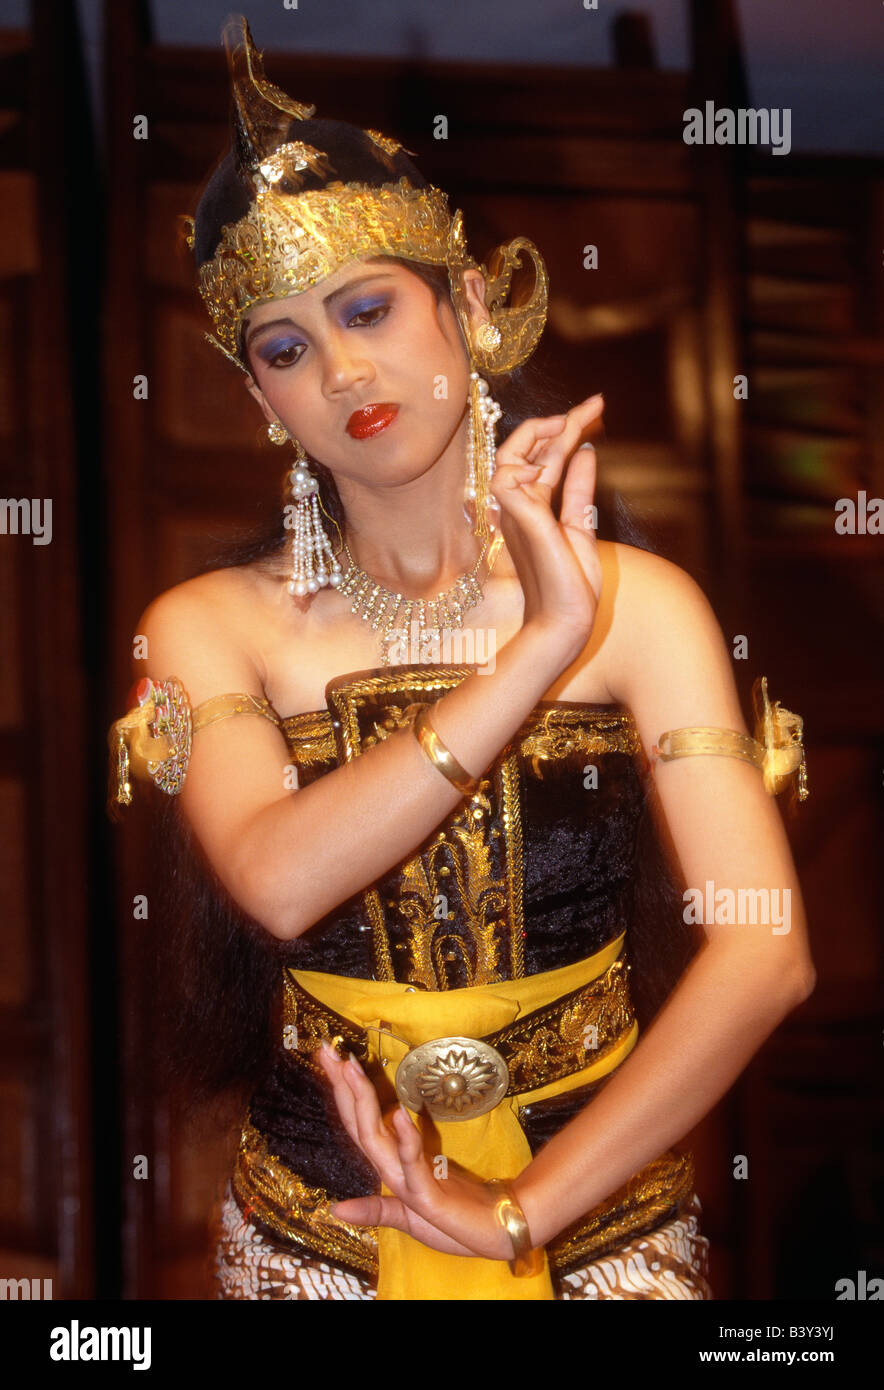 Woman performs a classical Javanese dance in traditional dress, Yogyakarta, Java, Indonesia Stock Photo